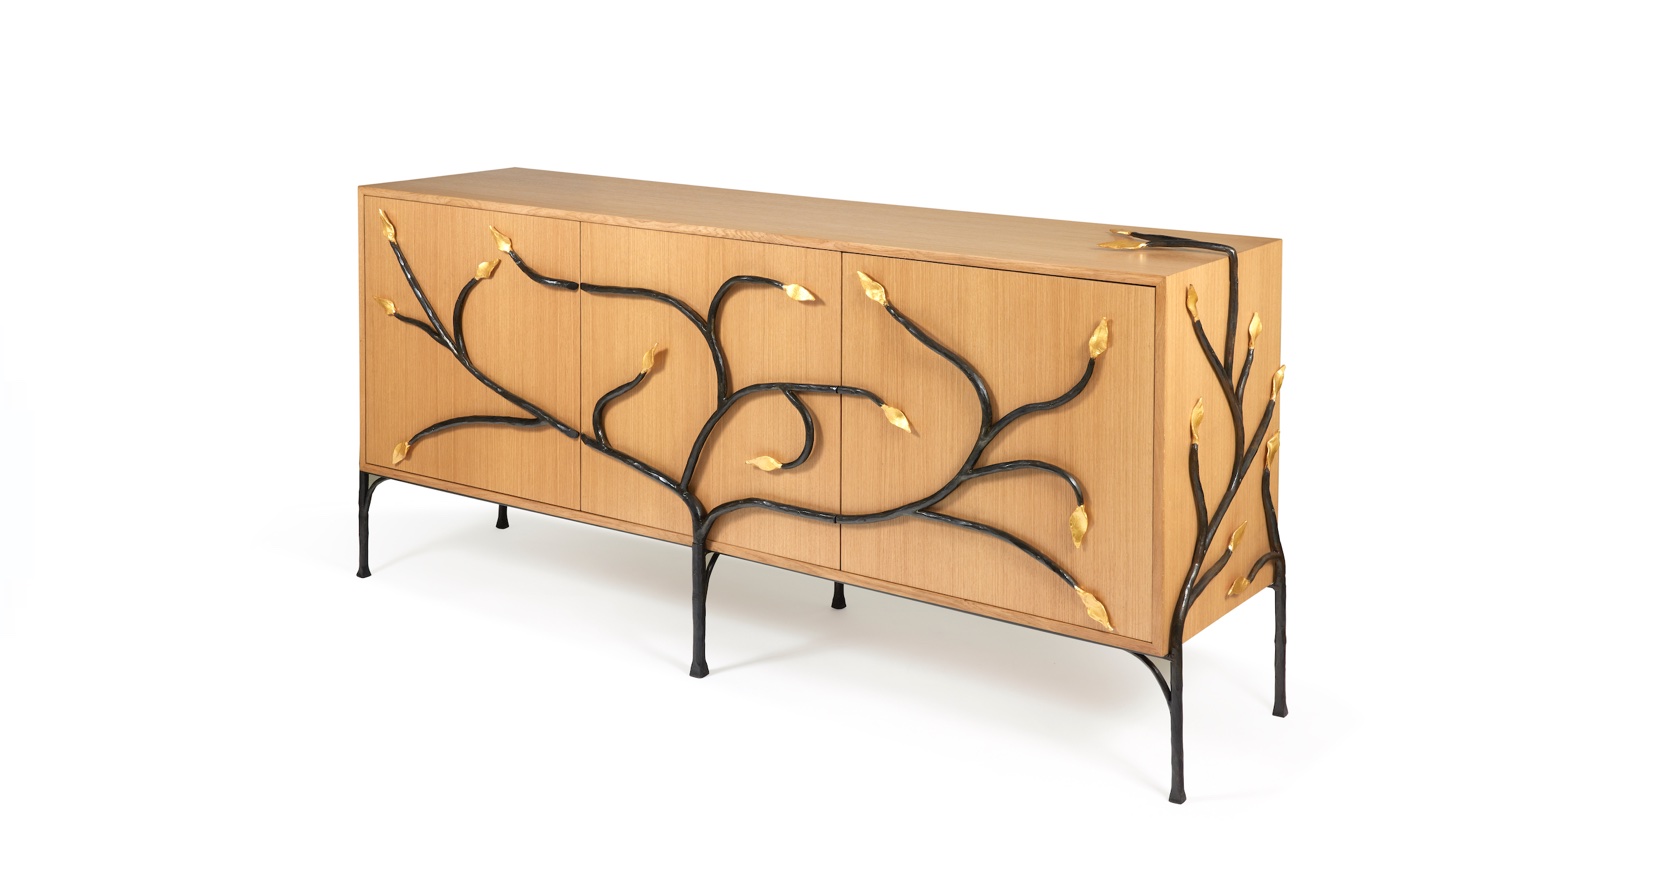 Garouste Bonetti, sideboard in oak surrounded by sculptured wrought iron in the shape of branches, which are decorated with leaves in golden wrought iron